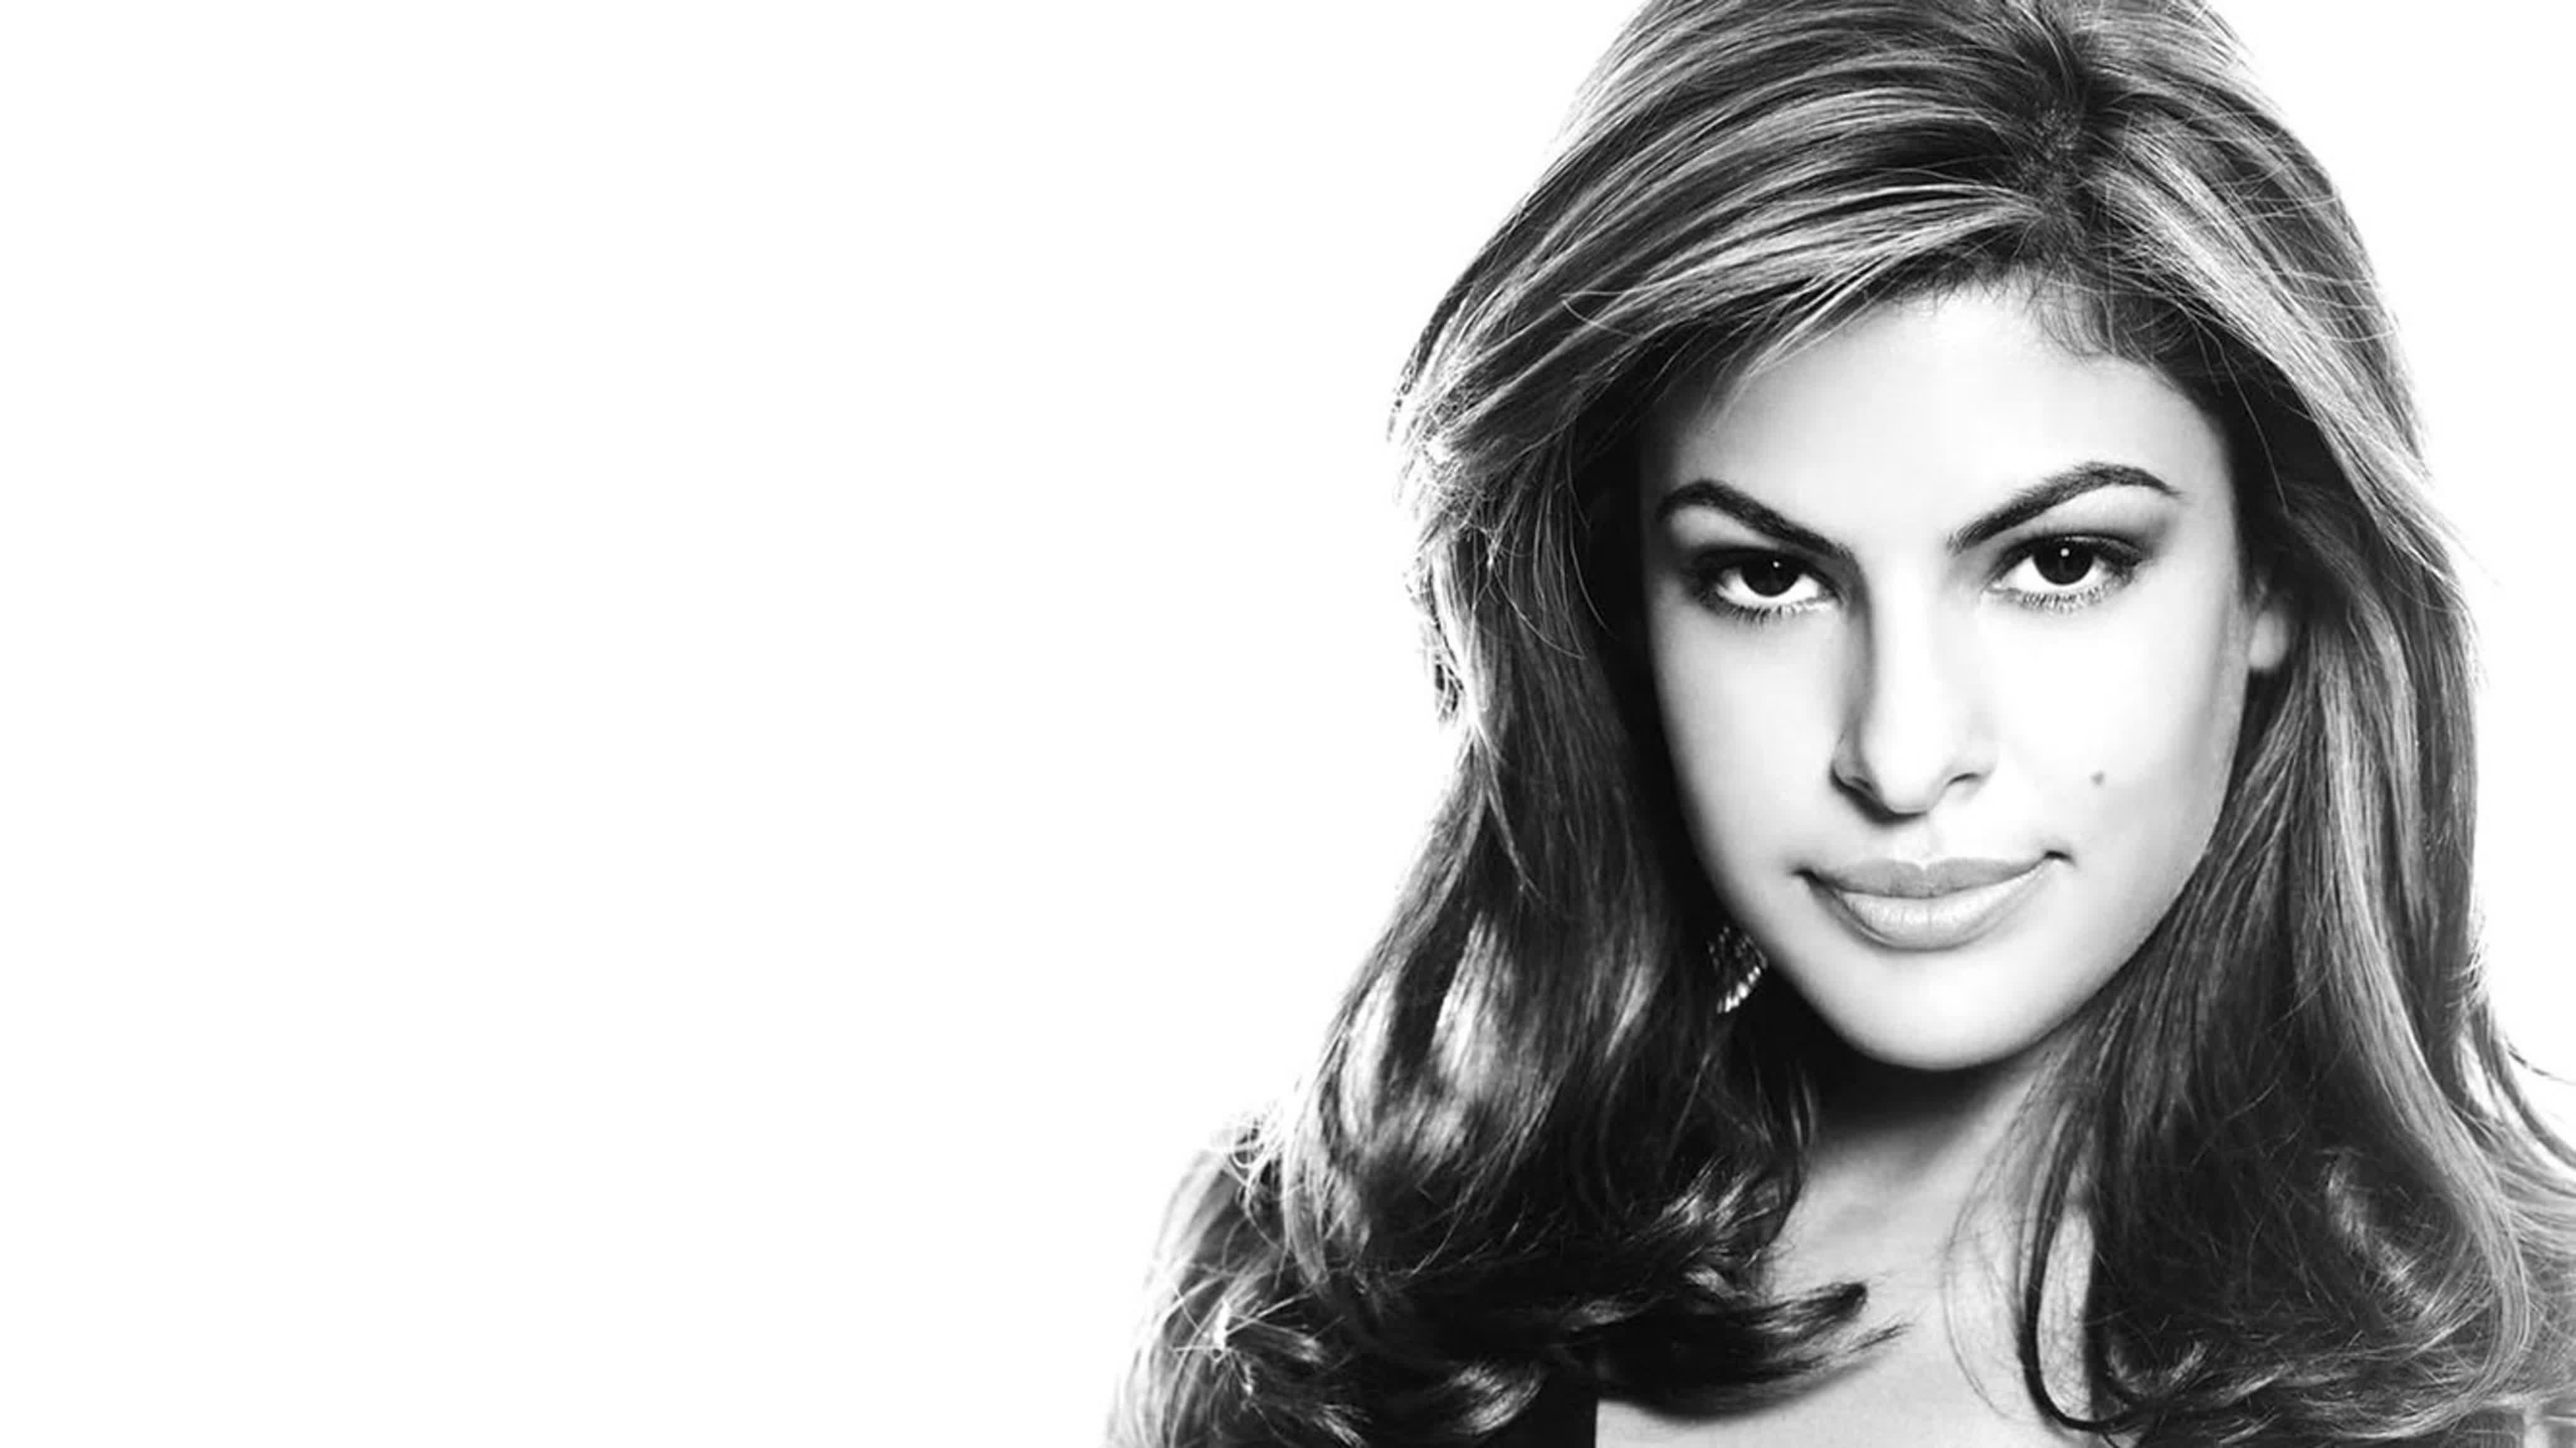 Eva mendes angel the windmills of your mind 2012 hd 720p - BEST XXX TUBE